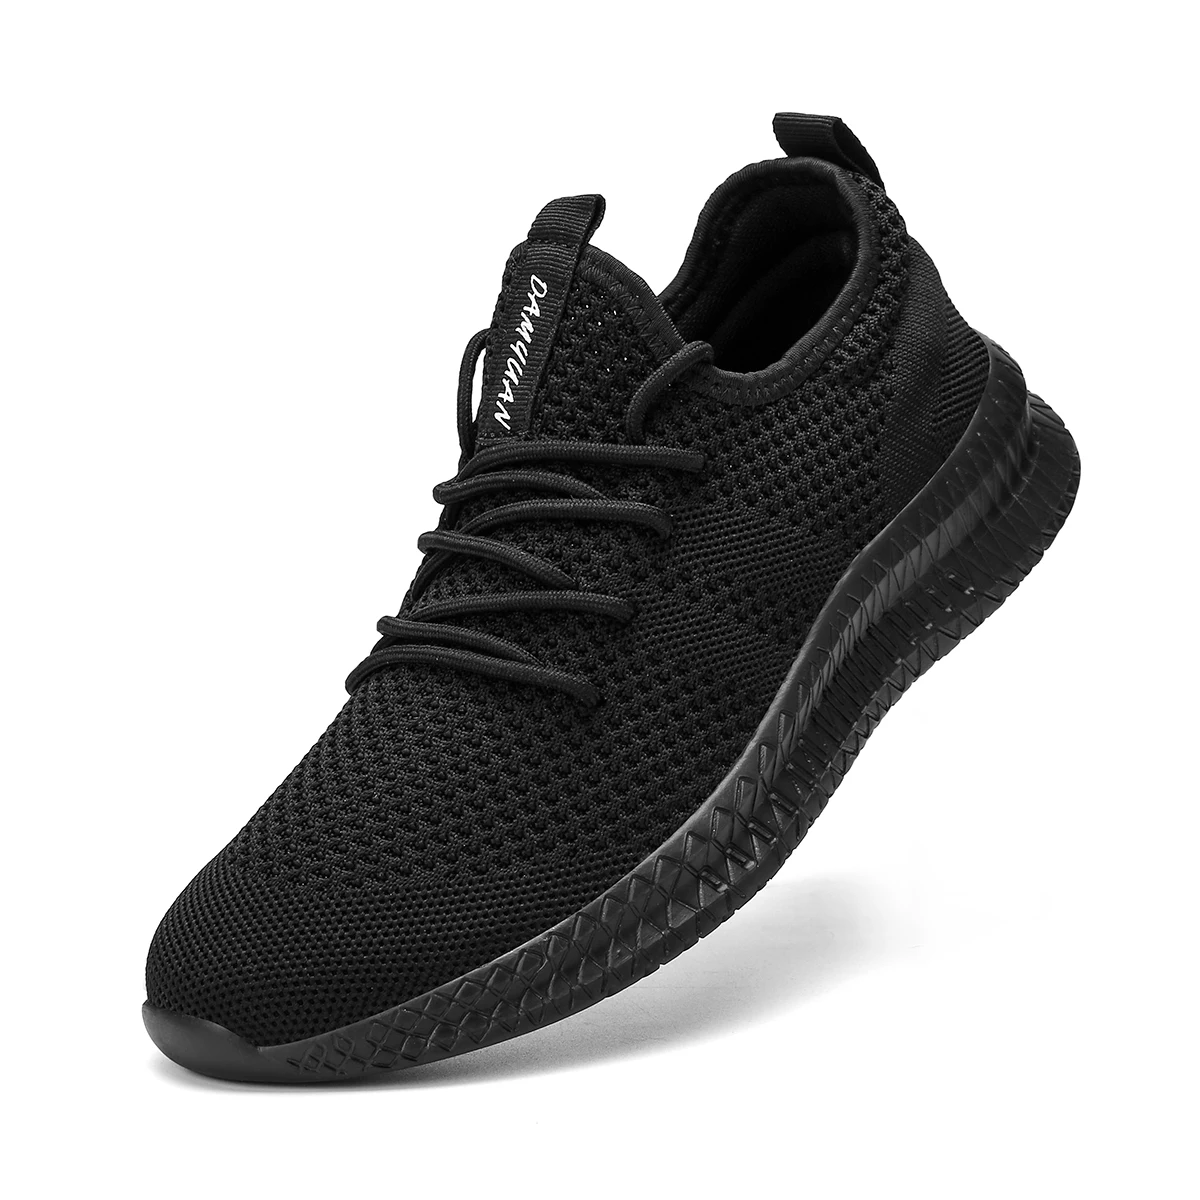 Damyuan Running Shoes for Men Sneakers Flying Woven Comfortable Breathable Shoes Casual Man Jogging Men Sport Shoes Gym Trainers